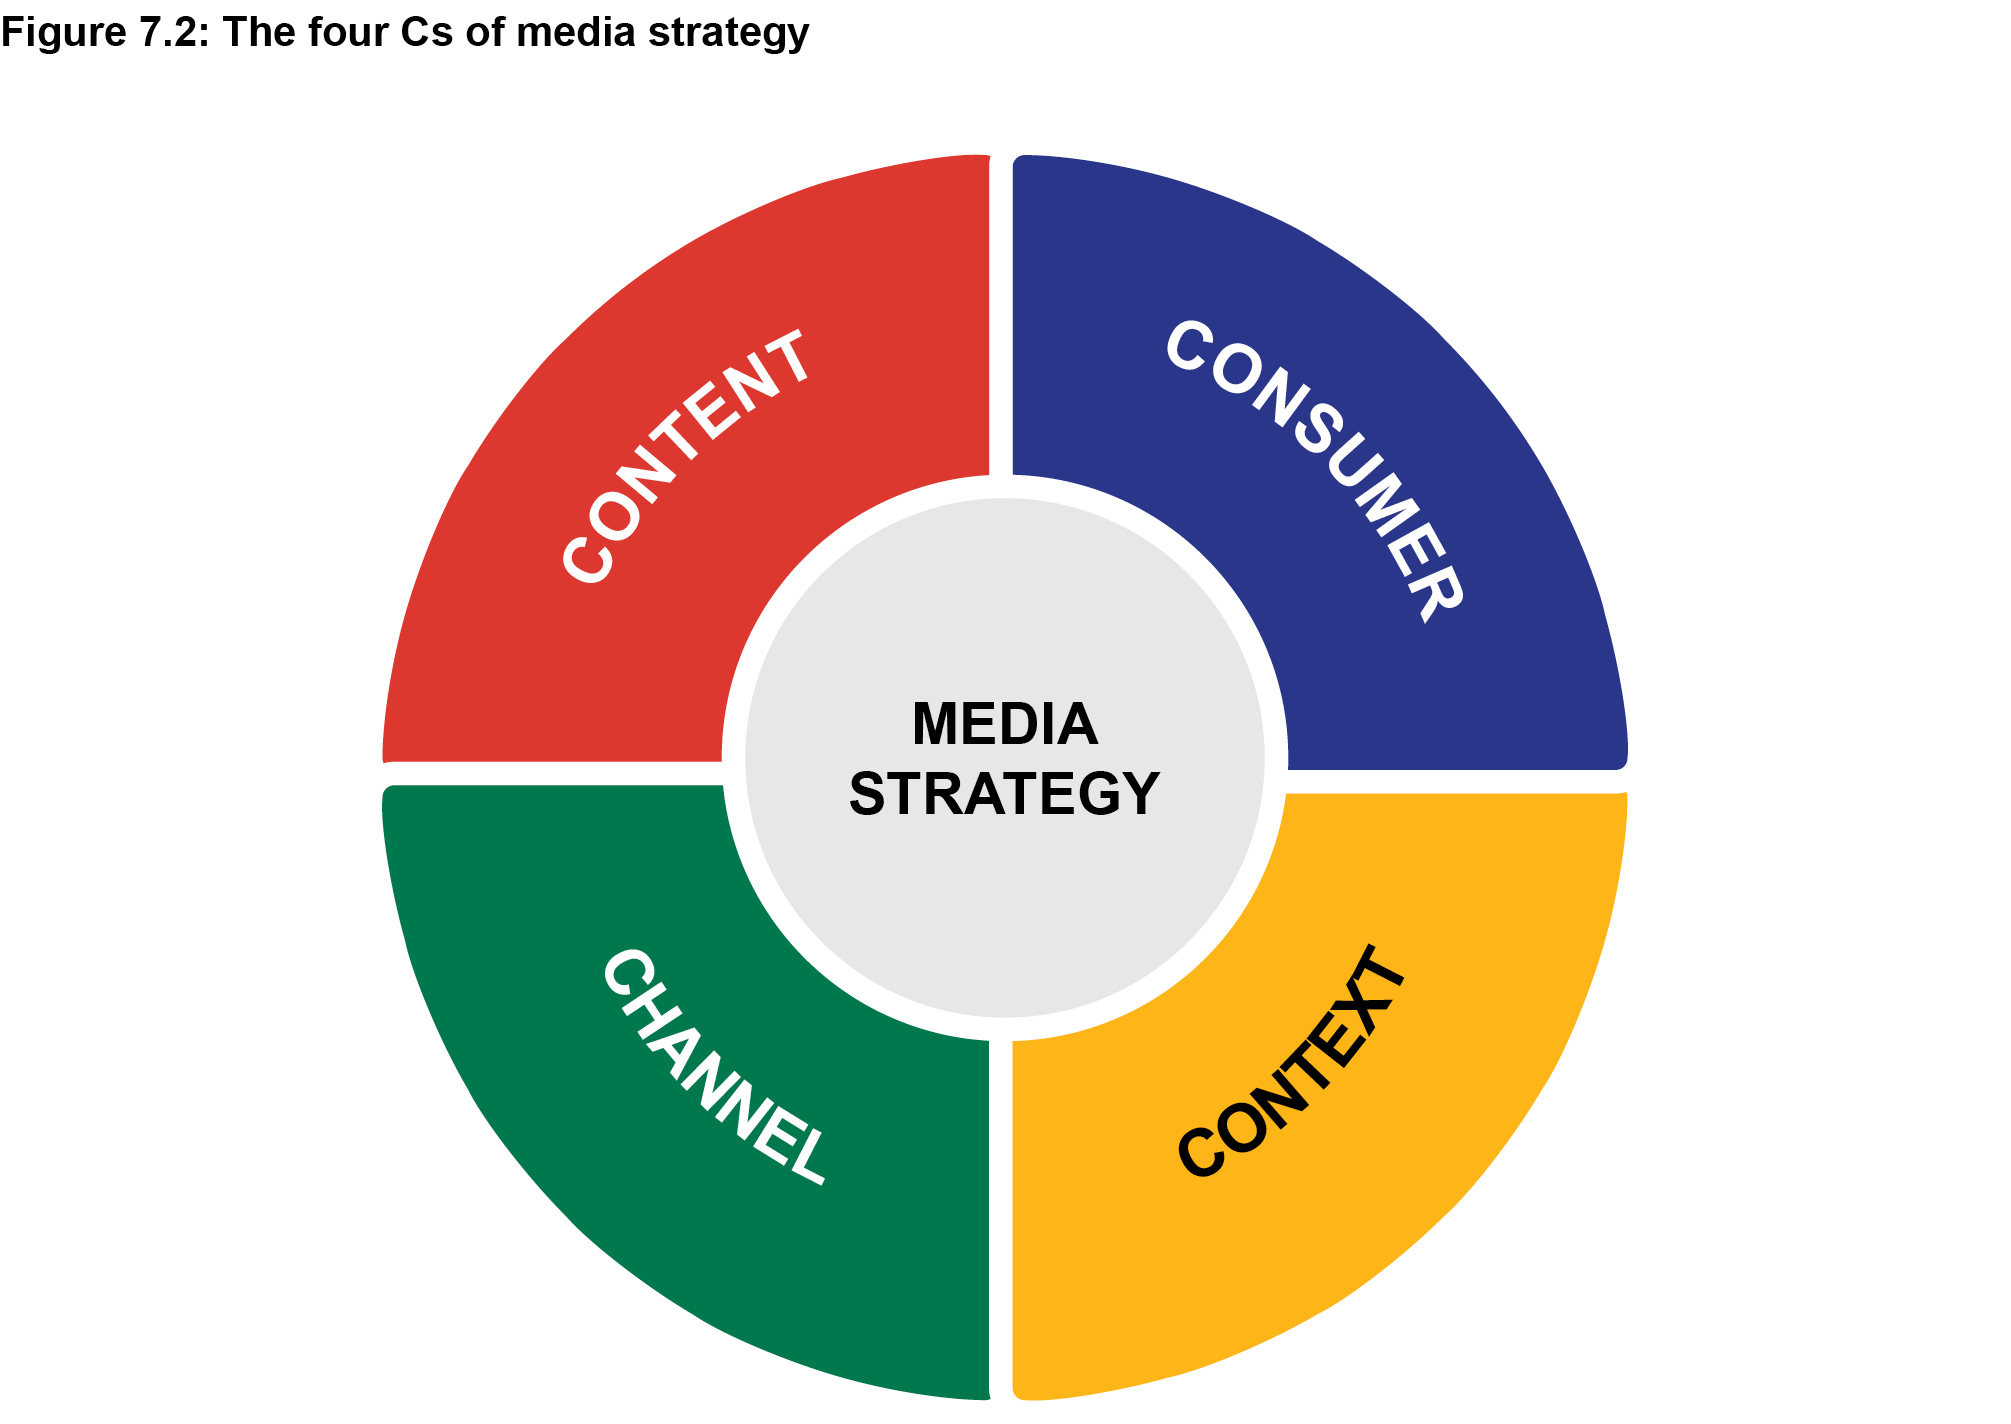 The four Cs of media strategy